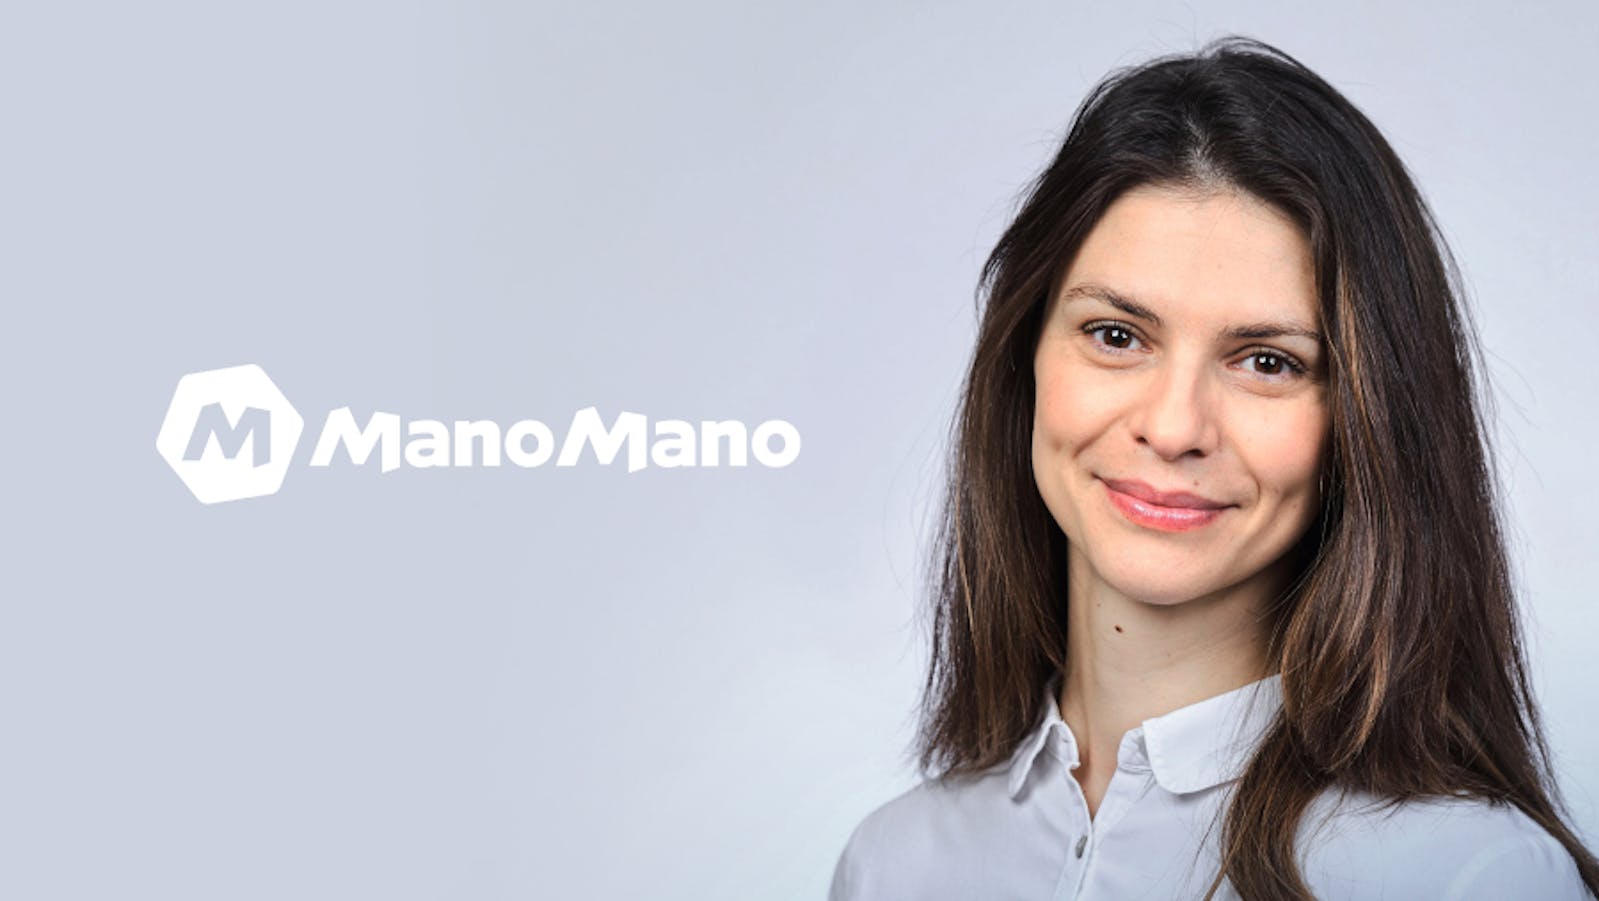 ManoMano: How to Put Human Connection at the Core of Digital CX